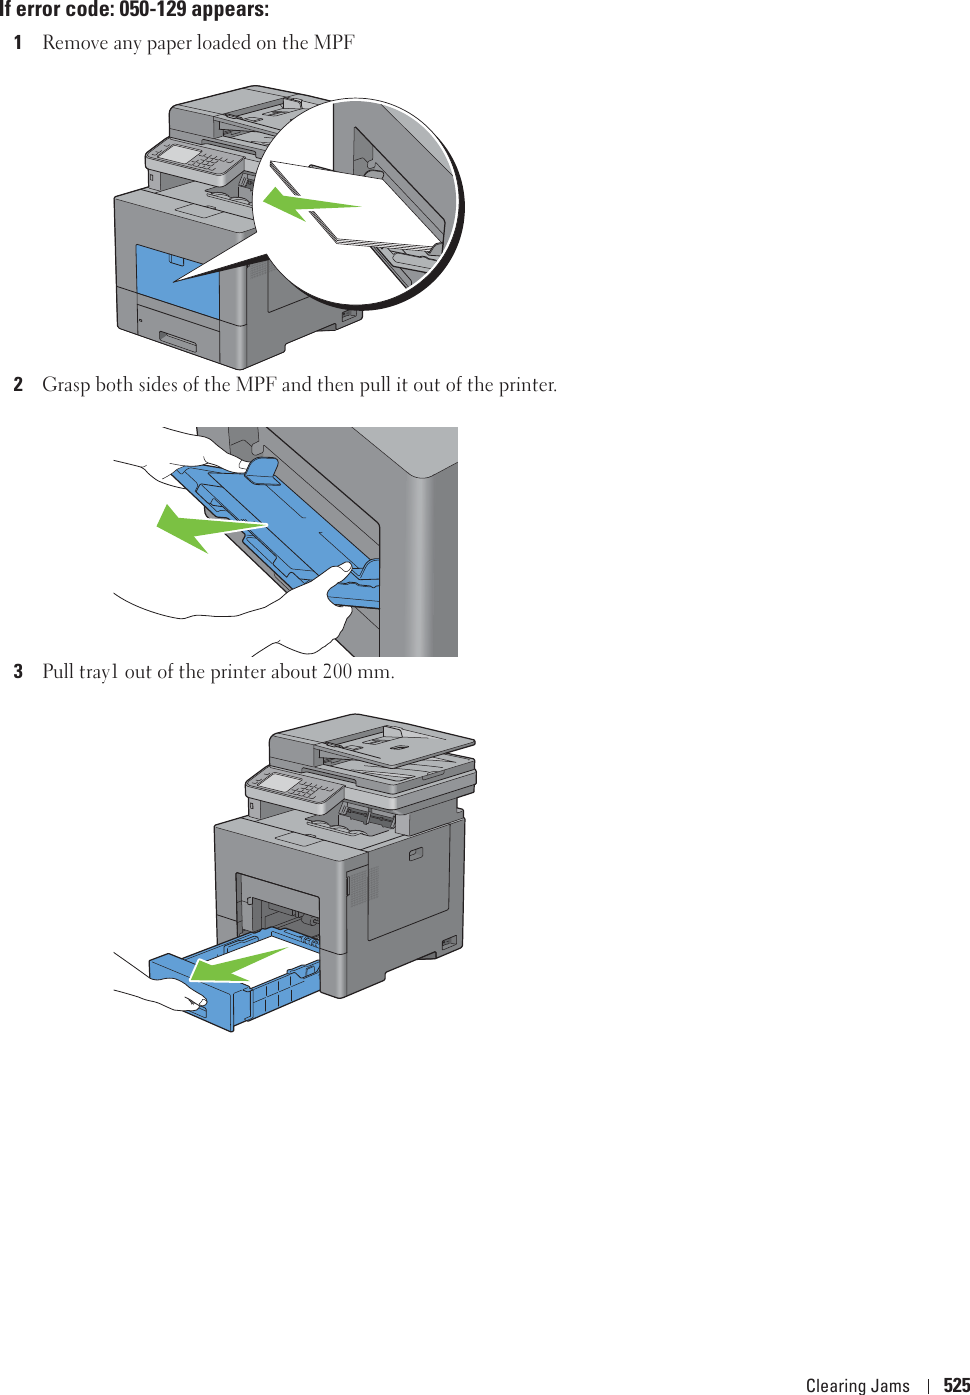 Clearing Jams 525If error code: 050-129 appears:1Remove any paper loaded on the MPF2Grasp both sides of the MPF and then pull it out of the printer.3Pull tray1 out of the printer about 200 mm. 